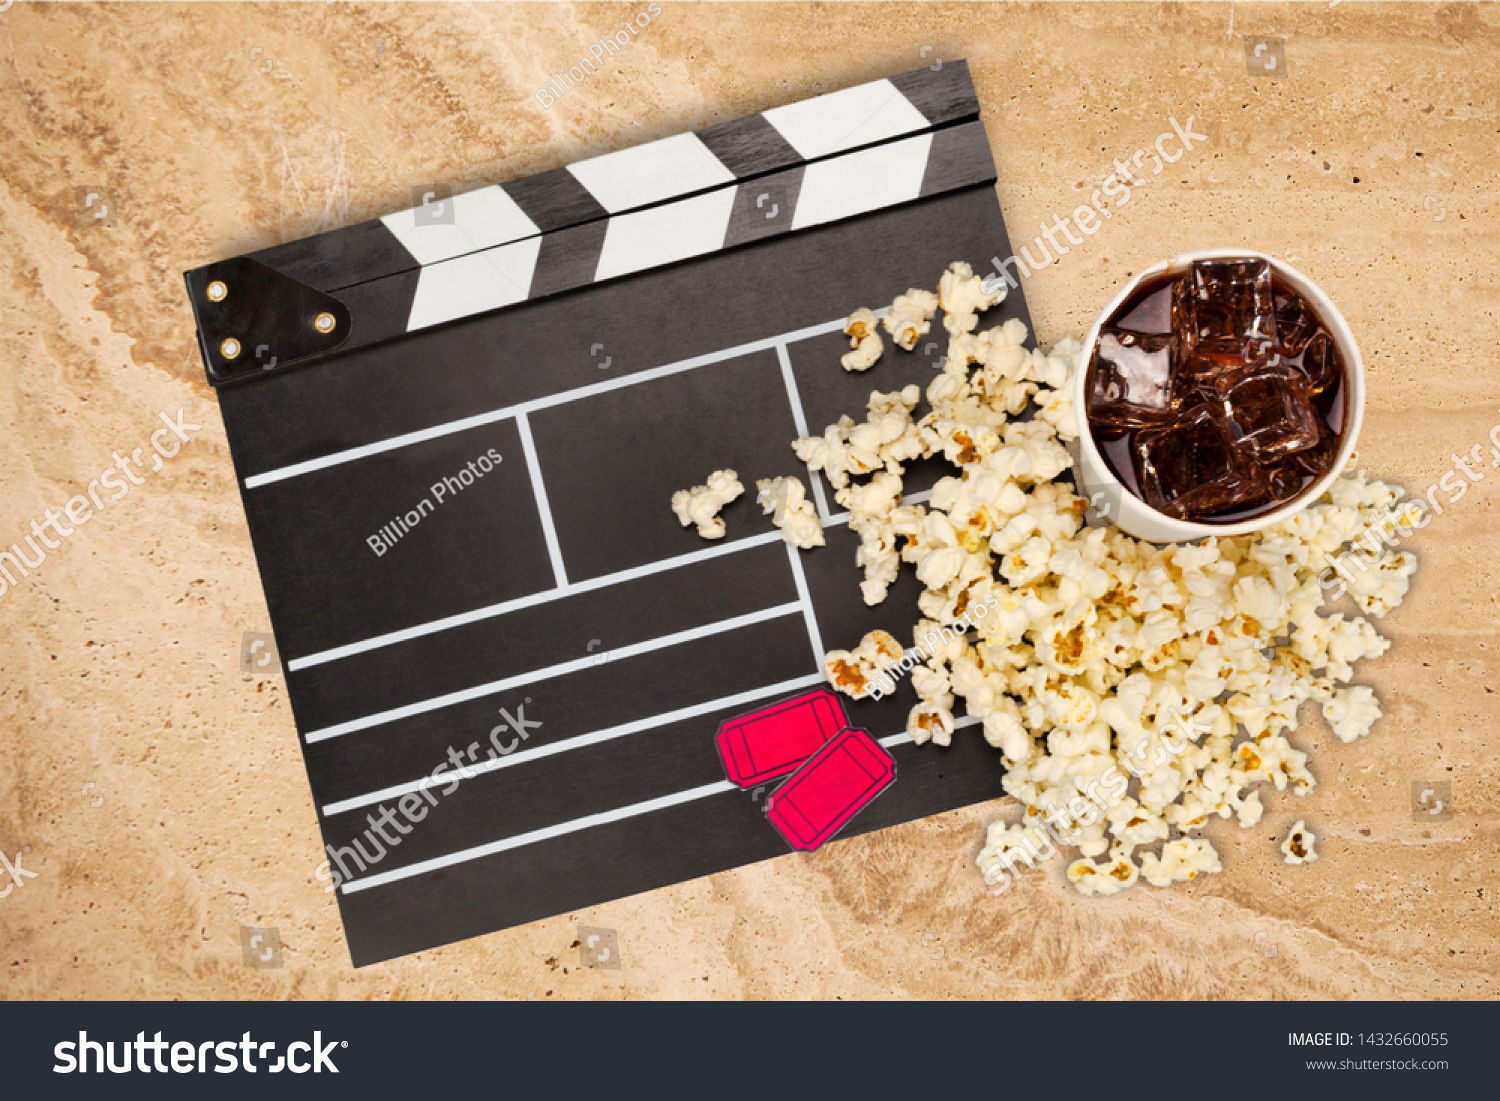 Night at the Movies concept, film clipboard and fresh popcorn #1432660055